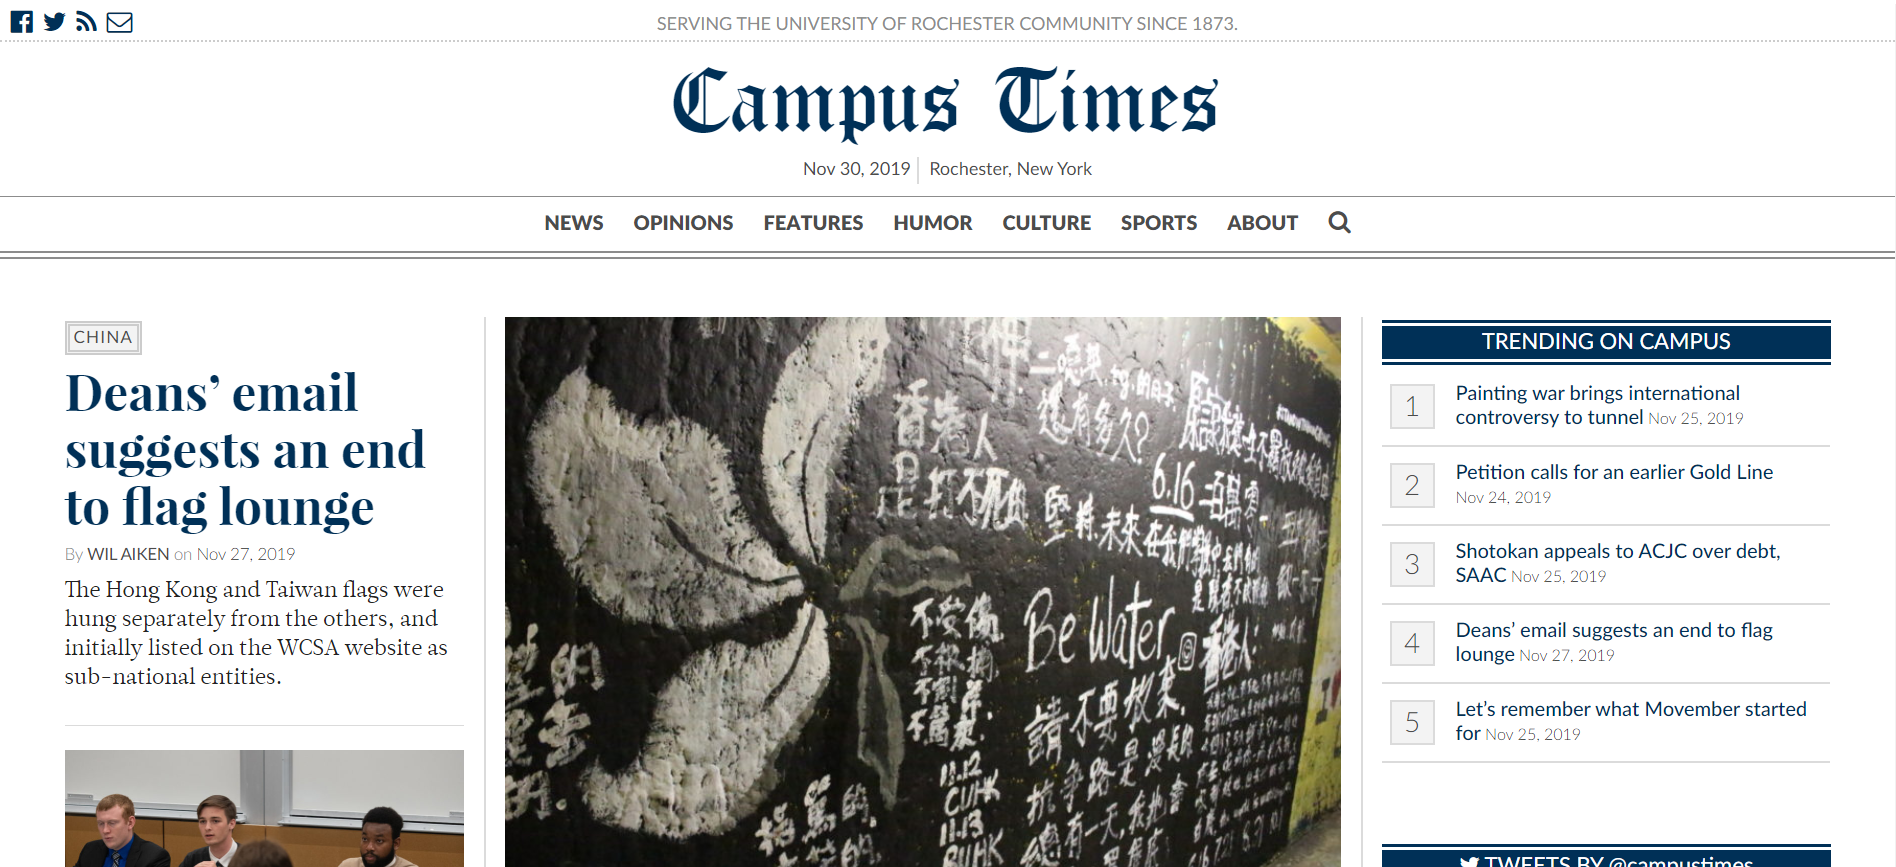 Campus Times' Website